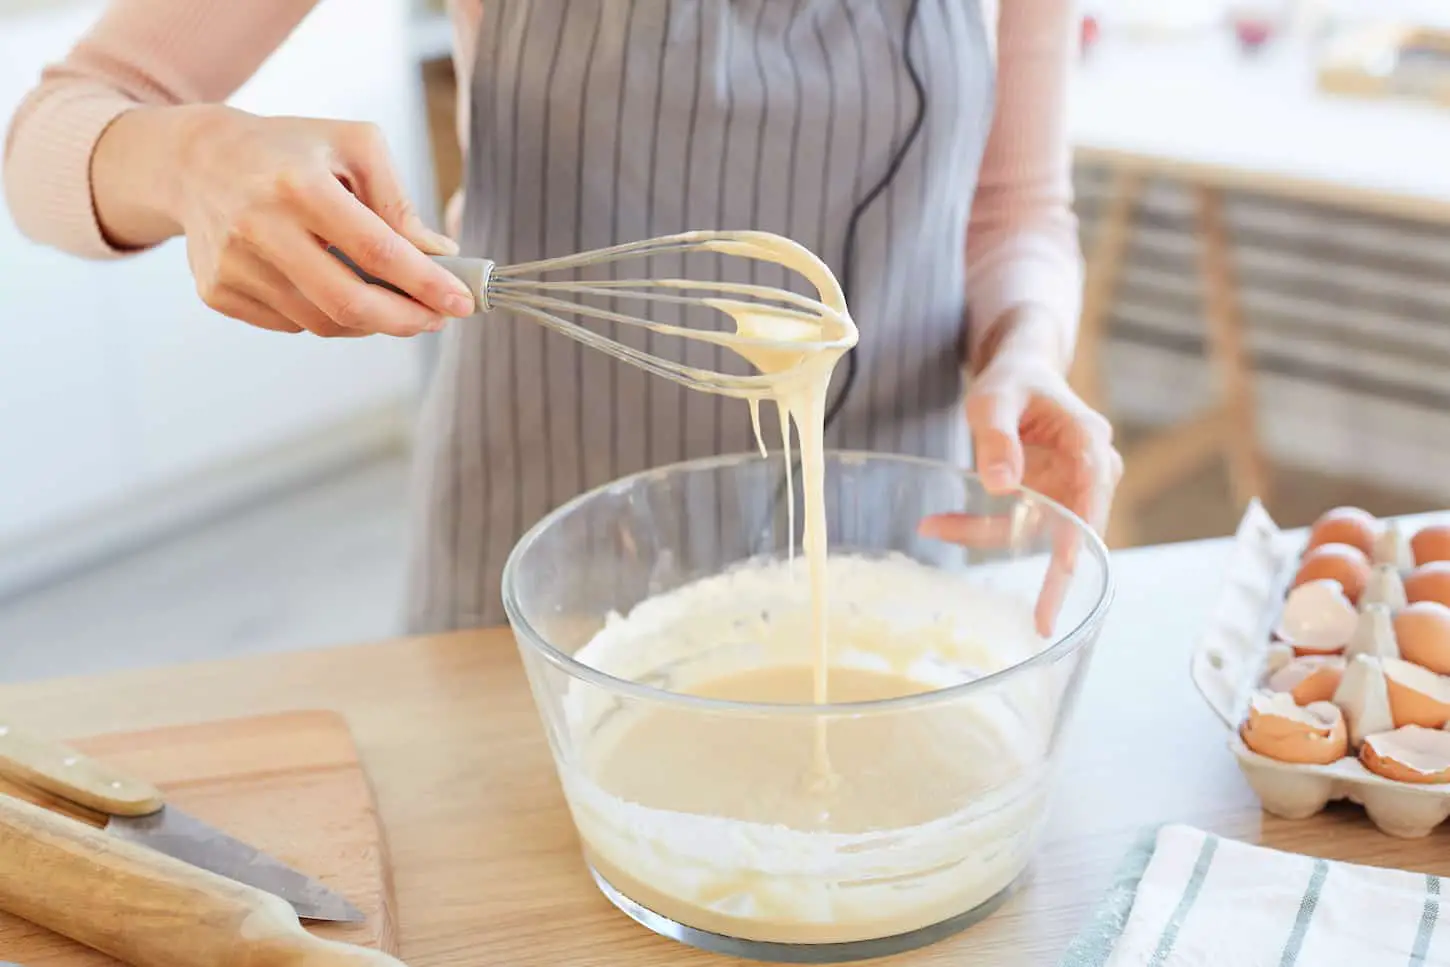 An image of a woman making dough using a whip.